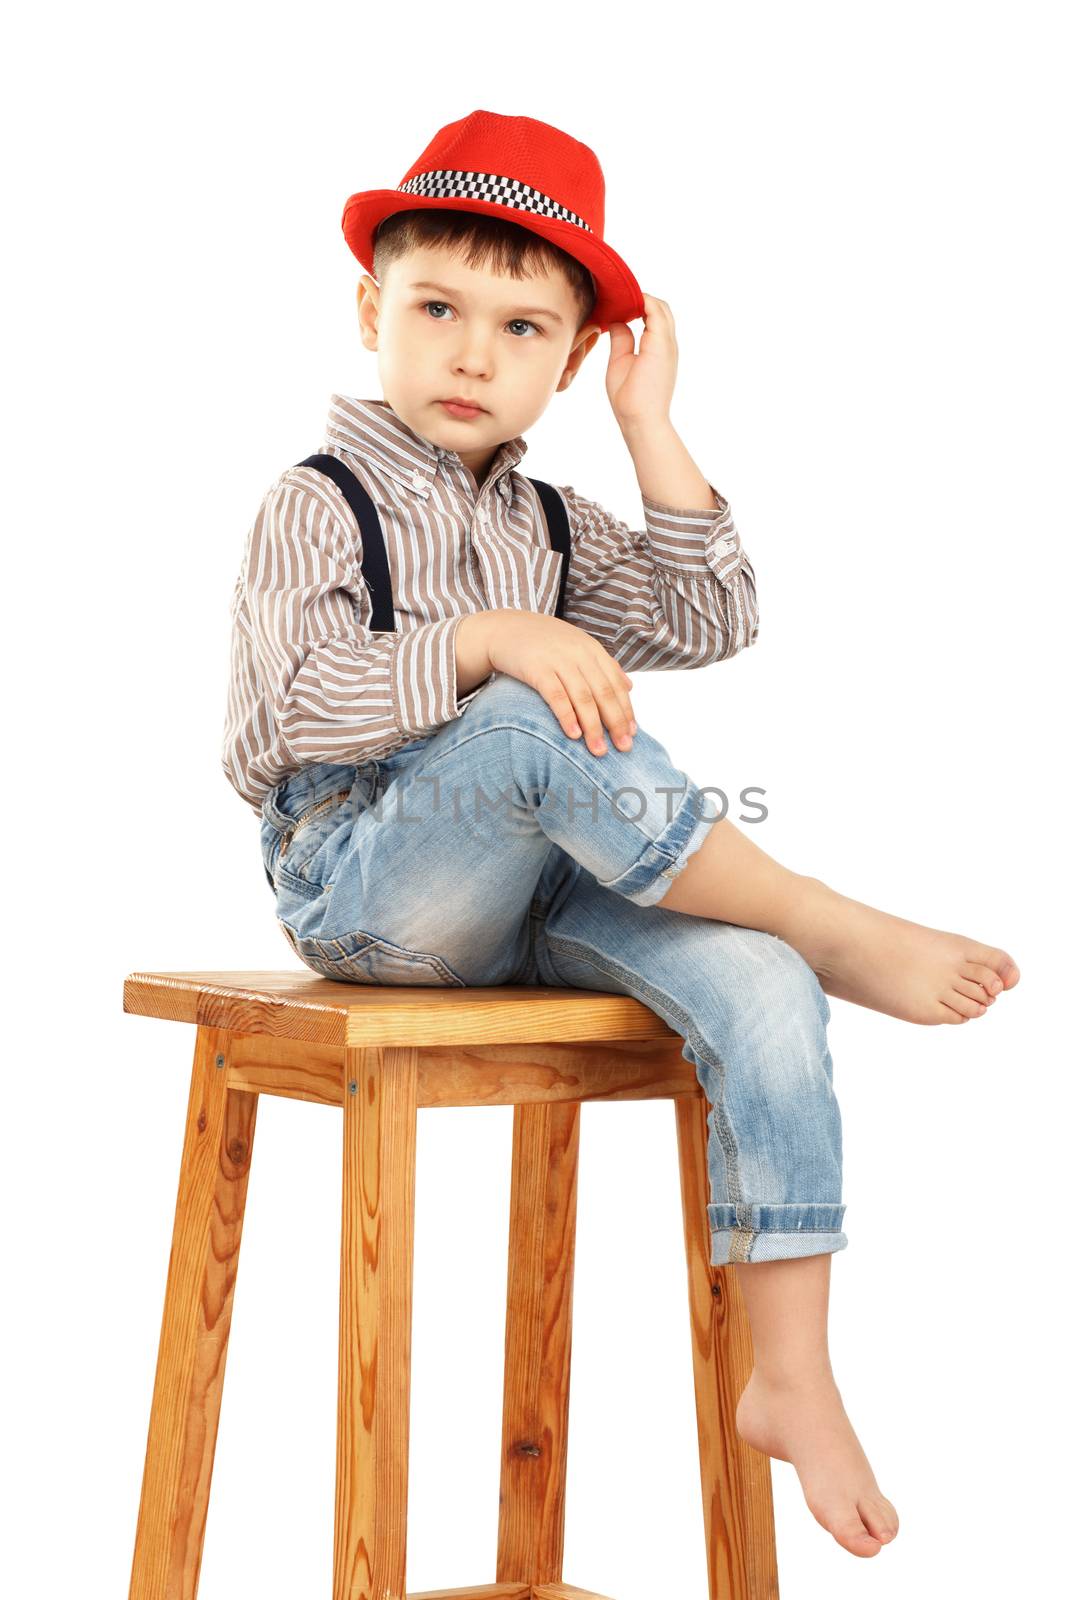 Portrait of a funny little boy sitting on a high stool in a red hat isolated on white background